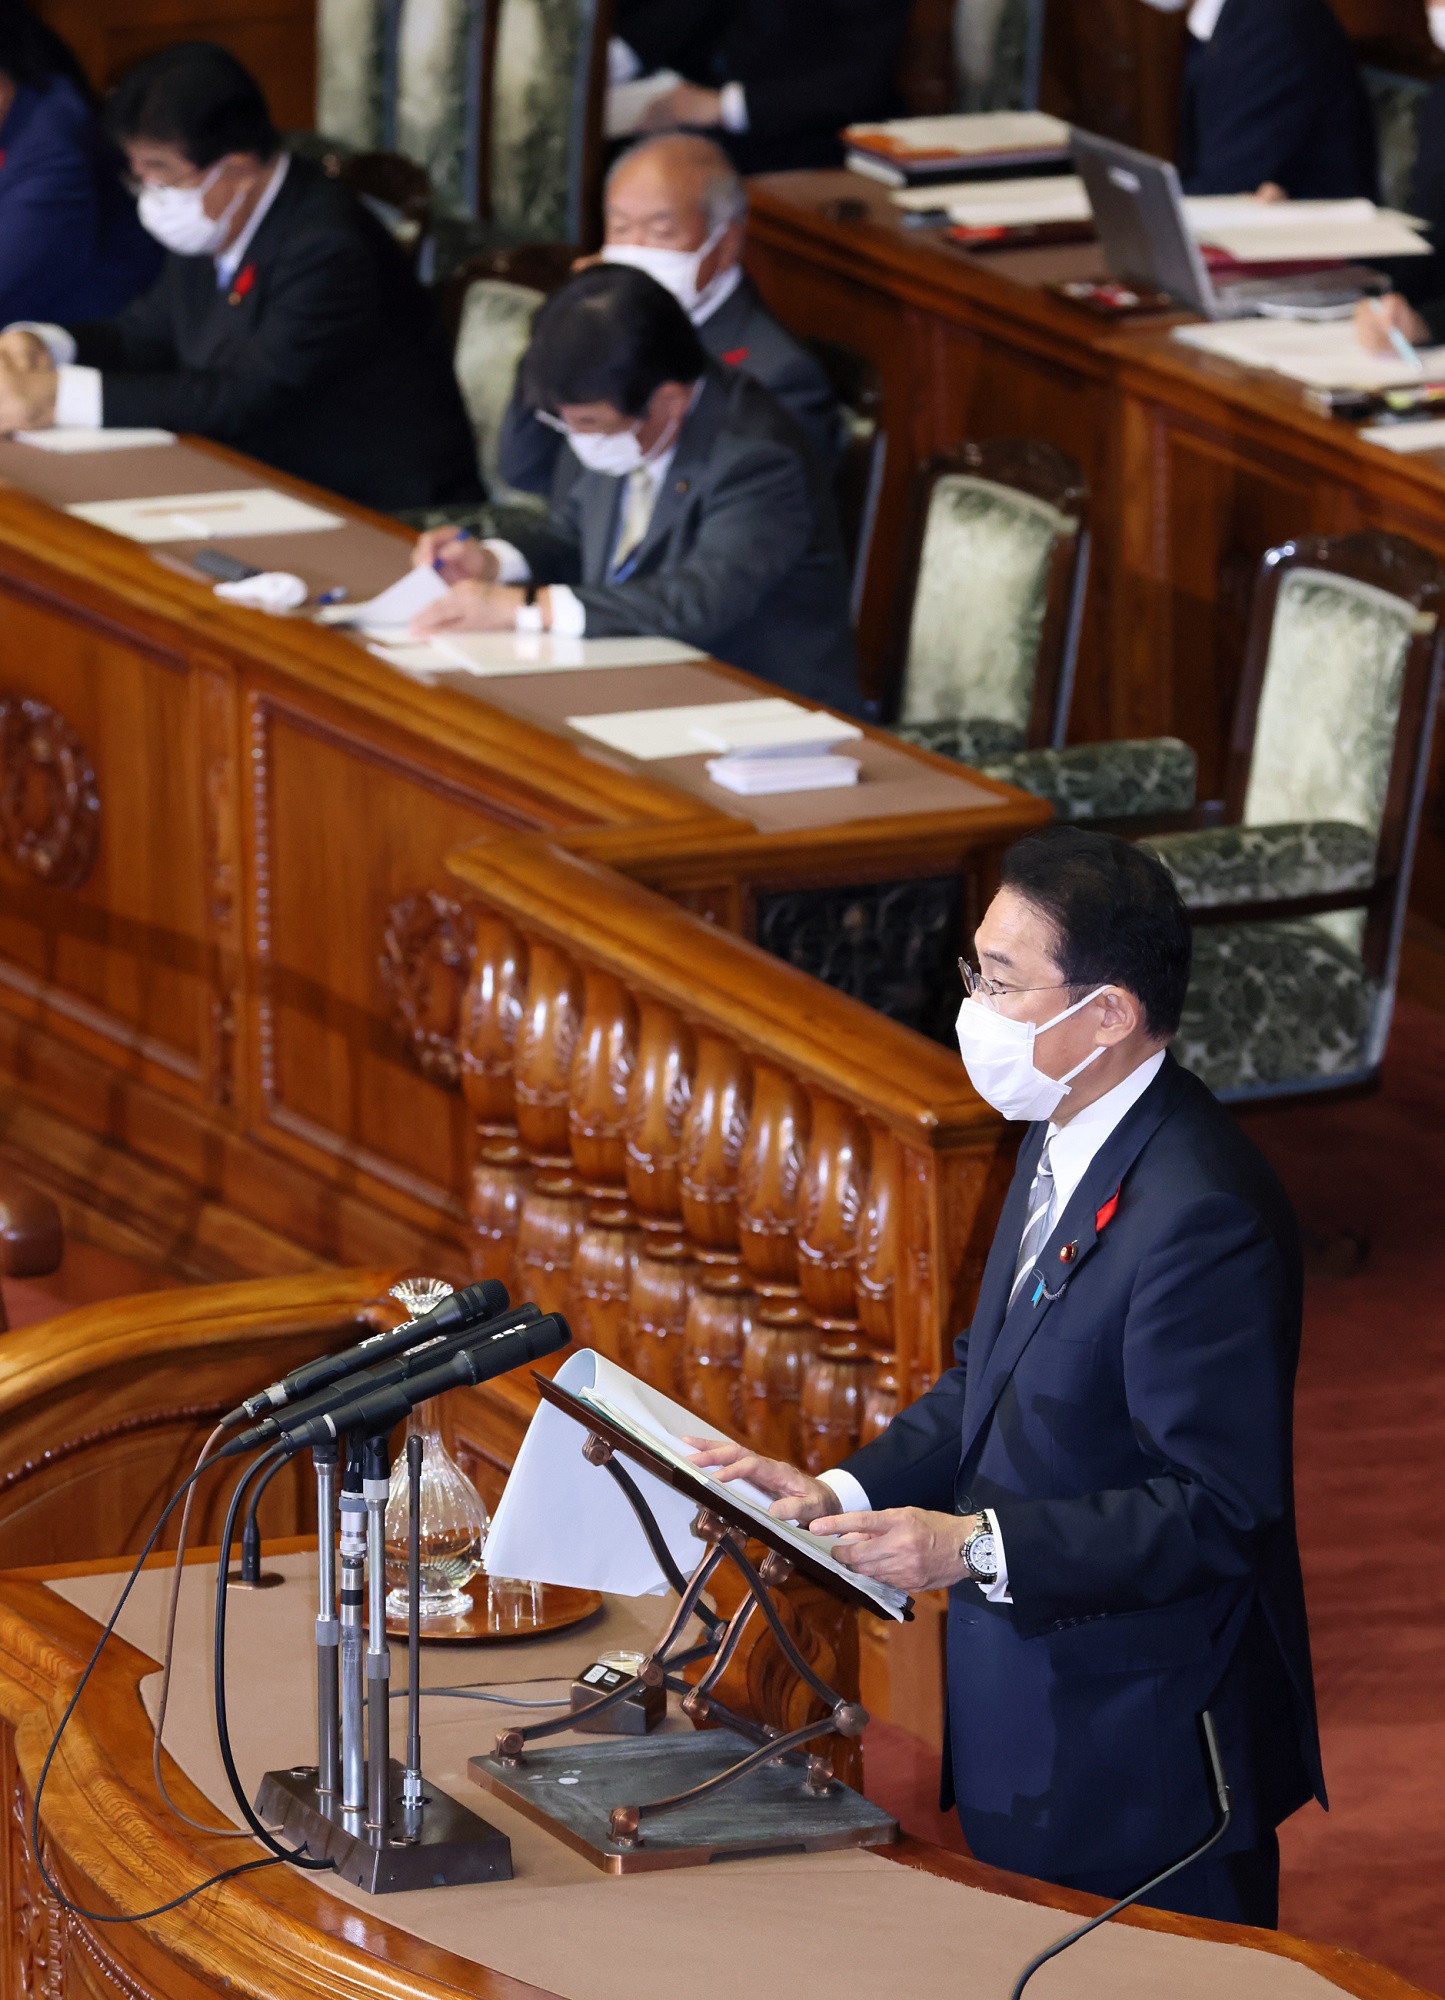 Photograph of the Prime Minister delivering a policy speech during a plenary session of the House of Representatives (8)